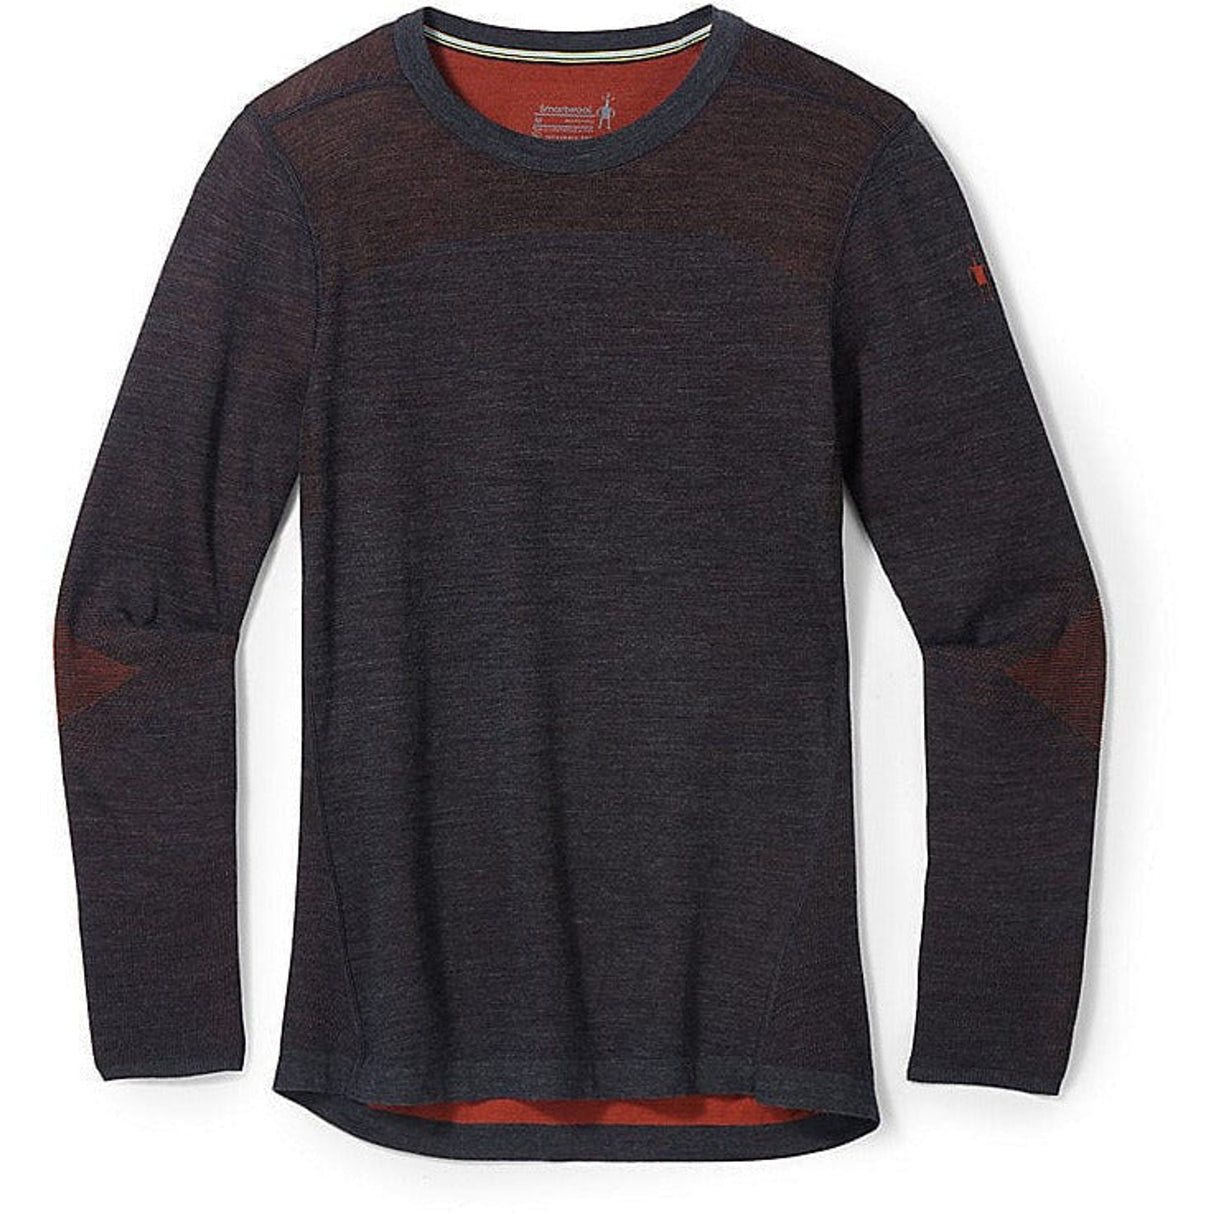 Smartwool Mens Intraknit Thermal Merino Base Layer Crew  -  XX-Large / Charcoal Heather